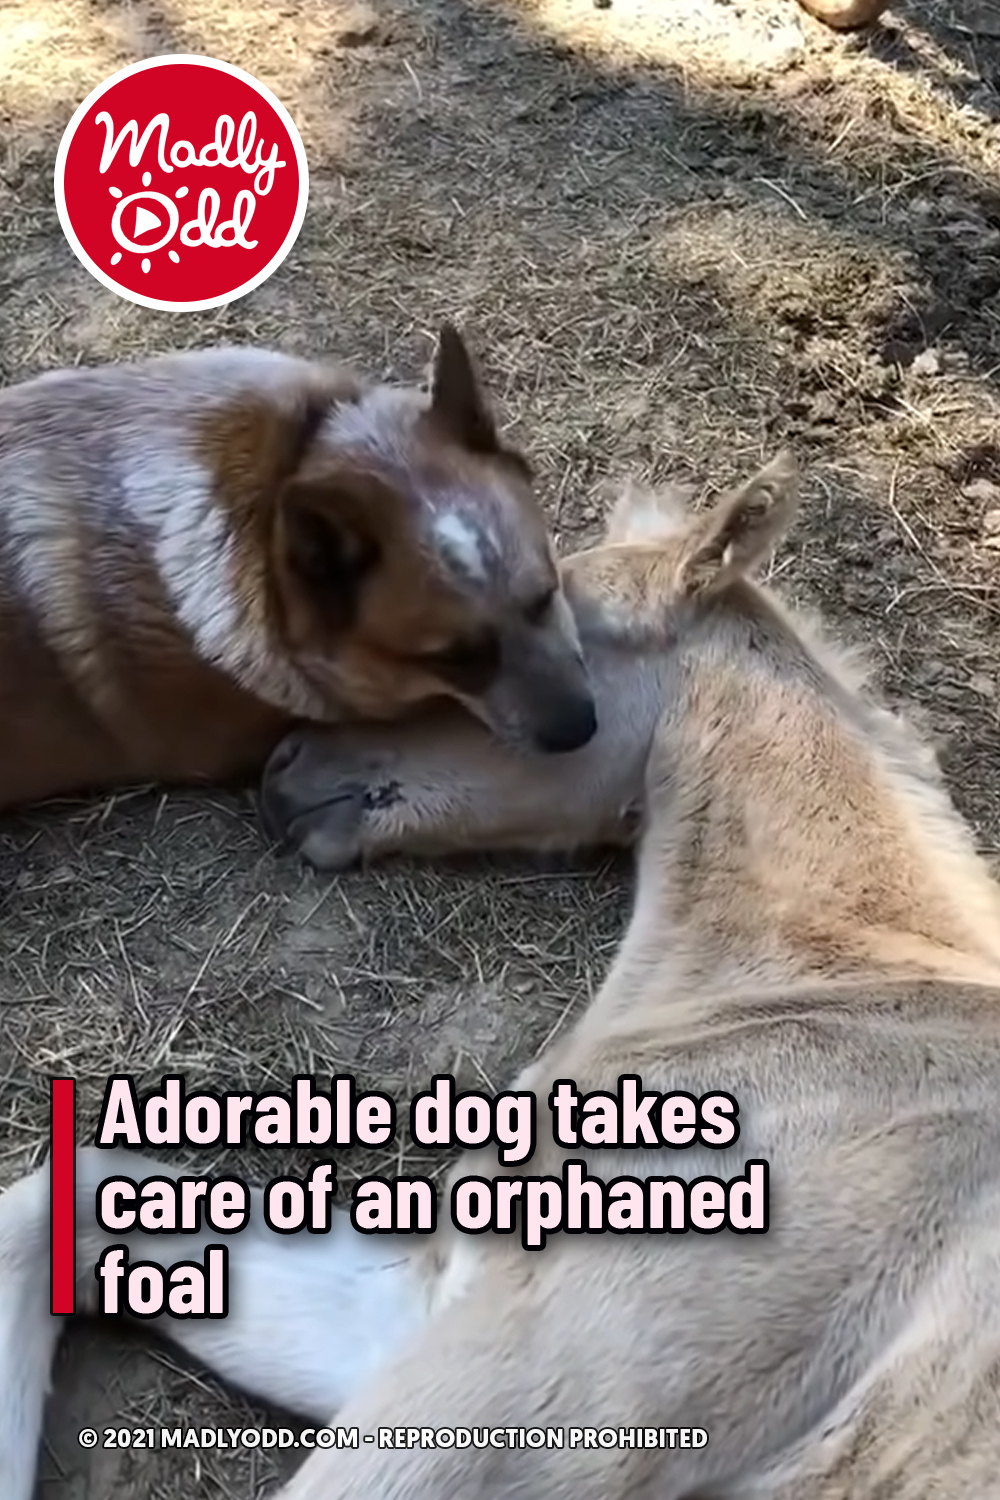 Adorable dog takes care of an orphaned foal